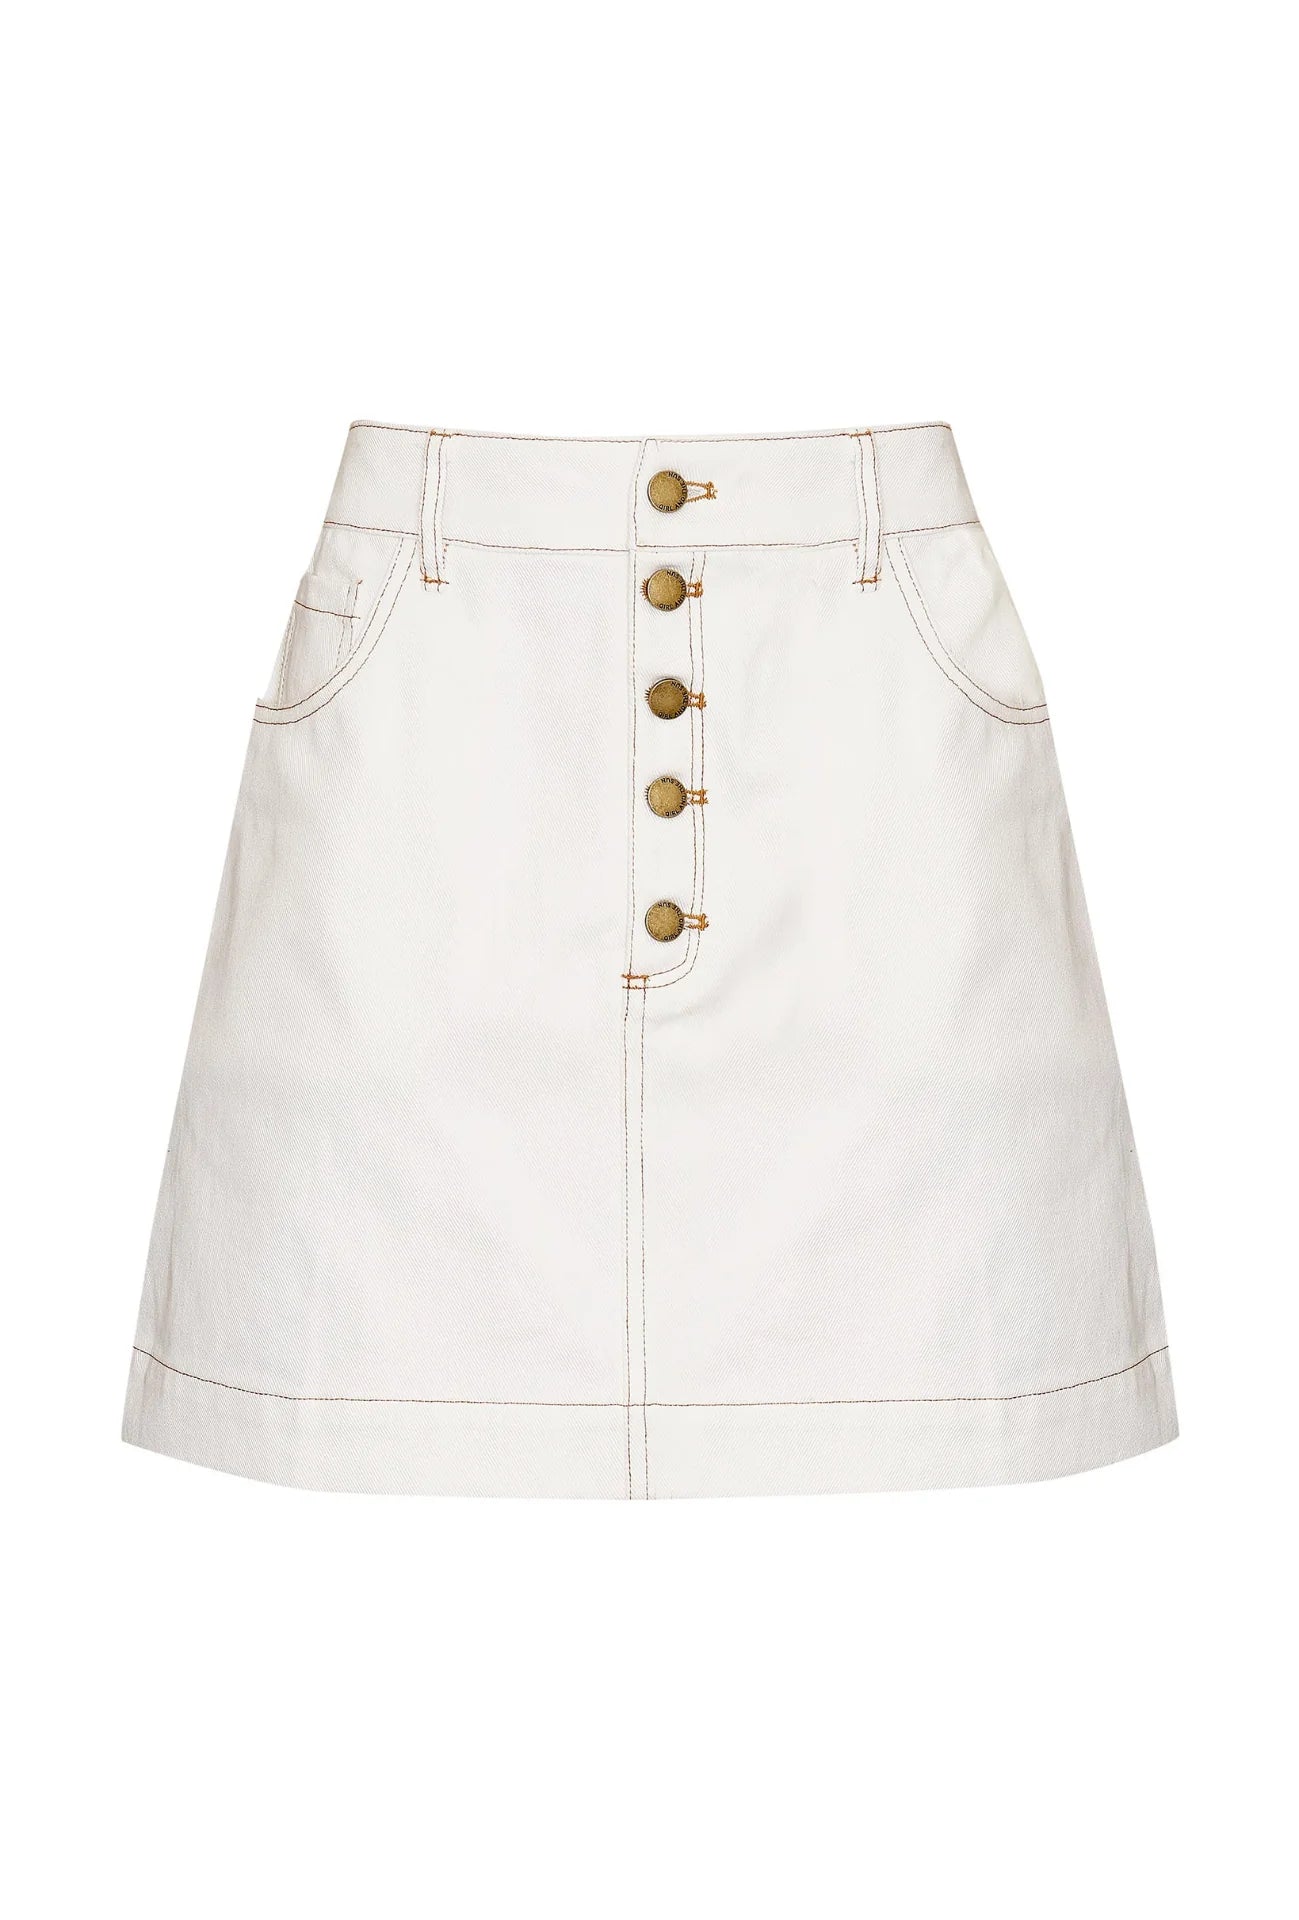 Transform your wardrobe with our Dora mini skirt in Ivory crafted in 100% cotton denim. Pair with your favorite tee and sneakers for a cool understated look